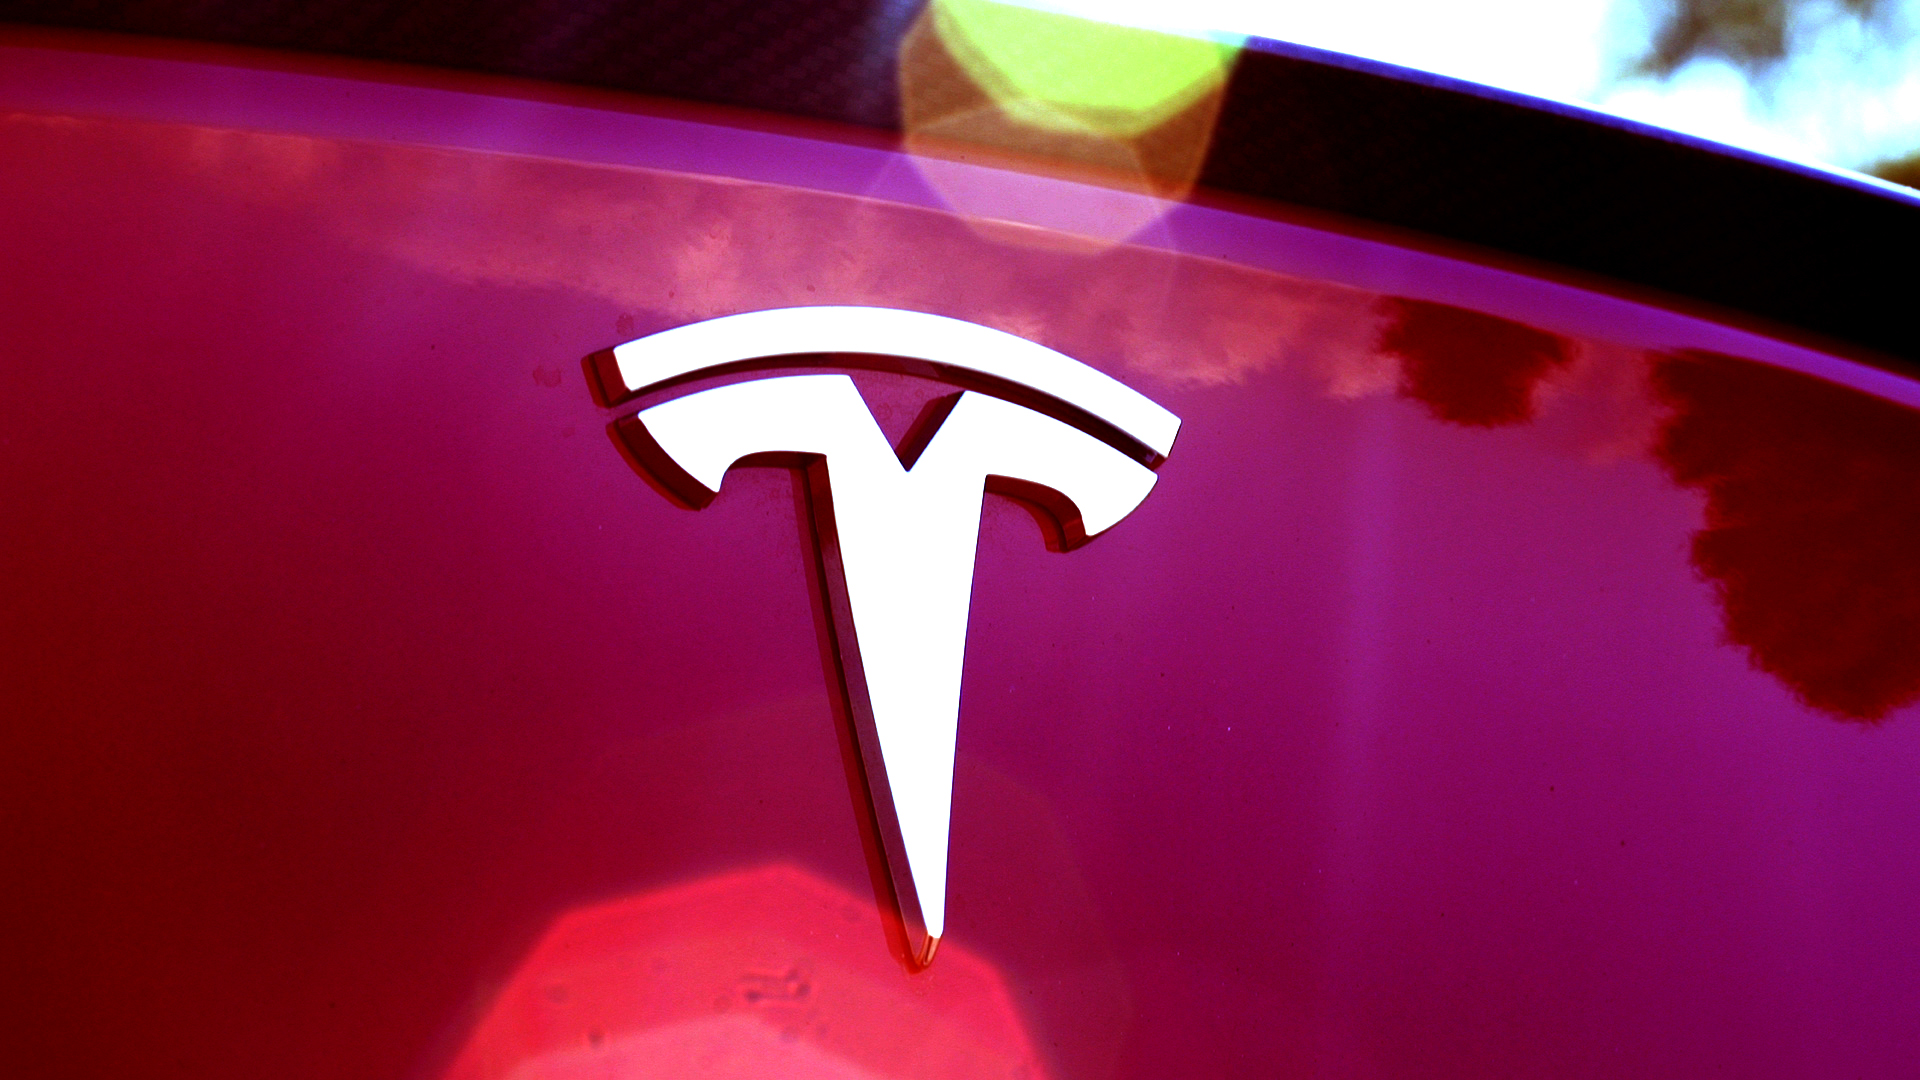 Report: Tesla Has Plans To Test A Self-Driving, Electric Semi-Truck